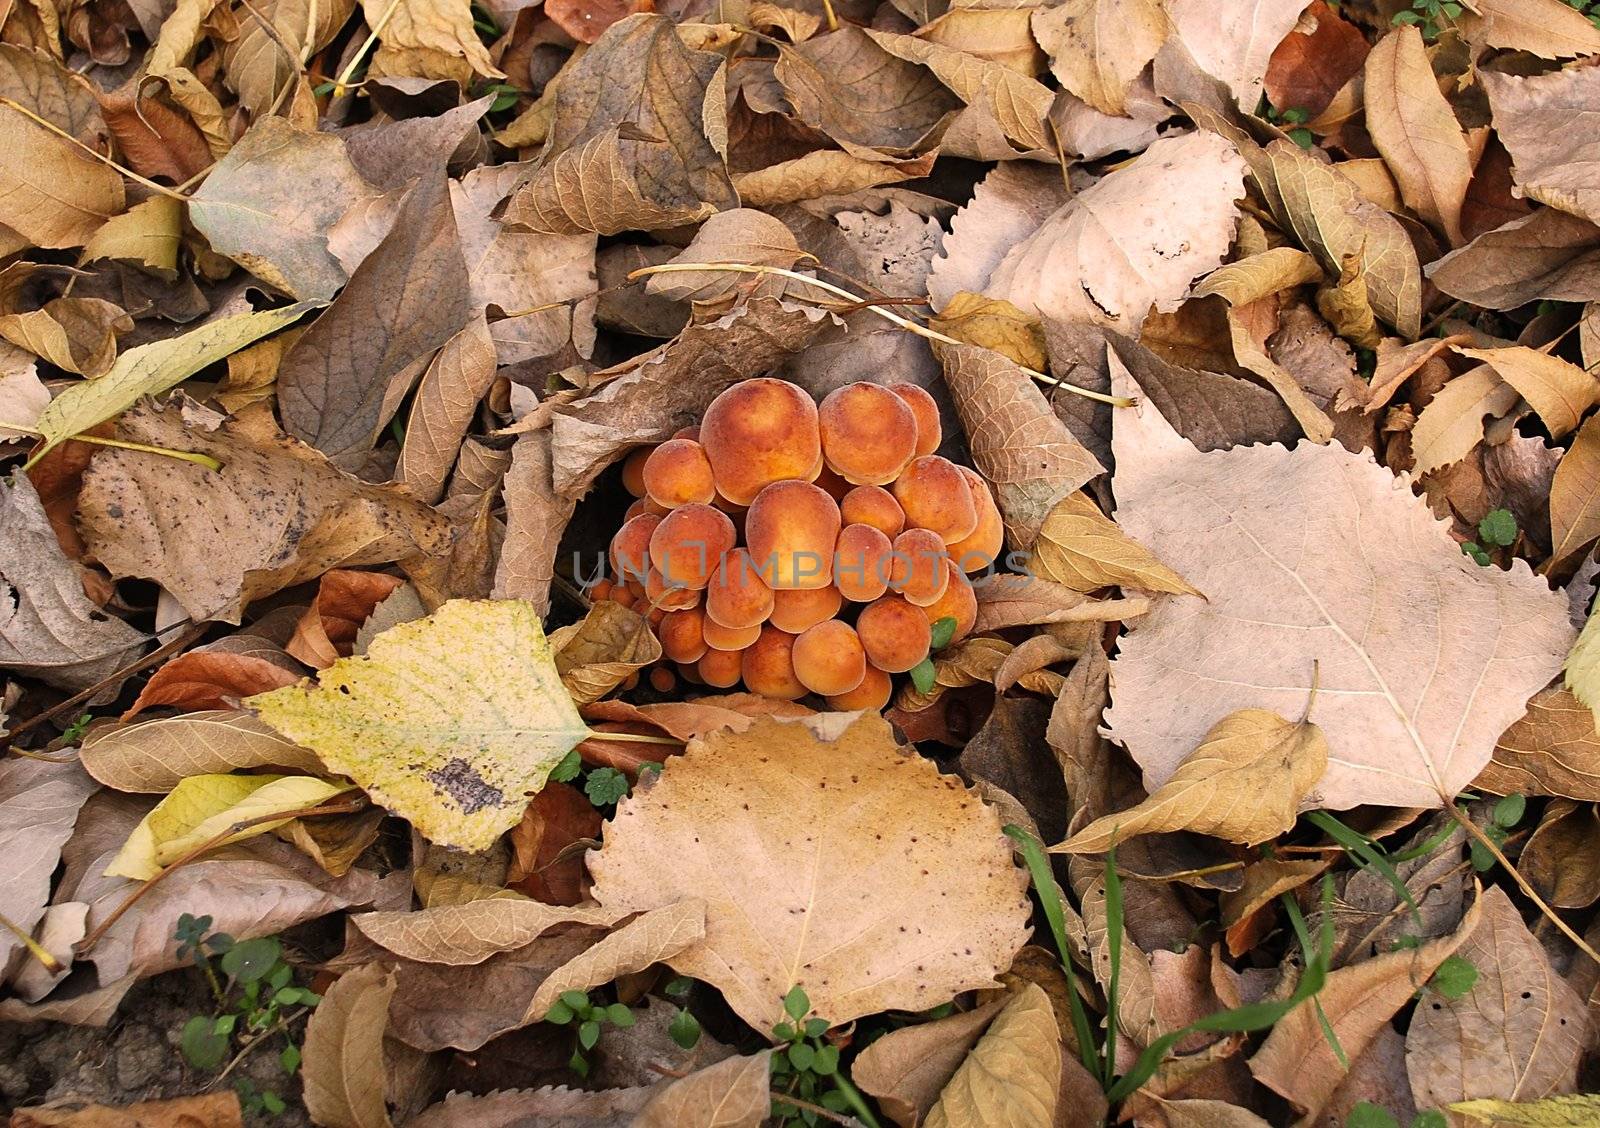 family of mushrooms on ground among dry leaves